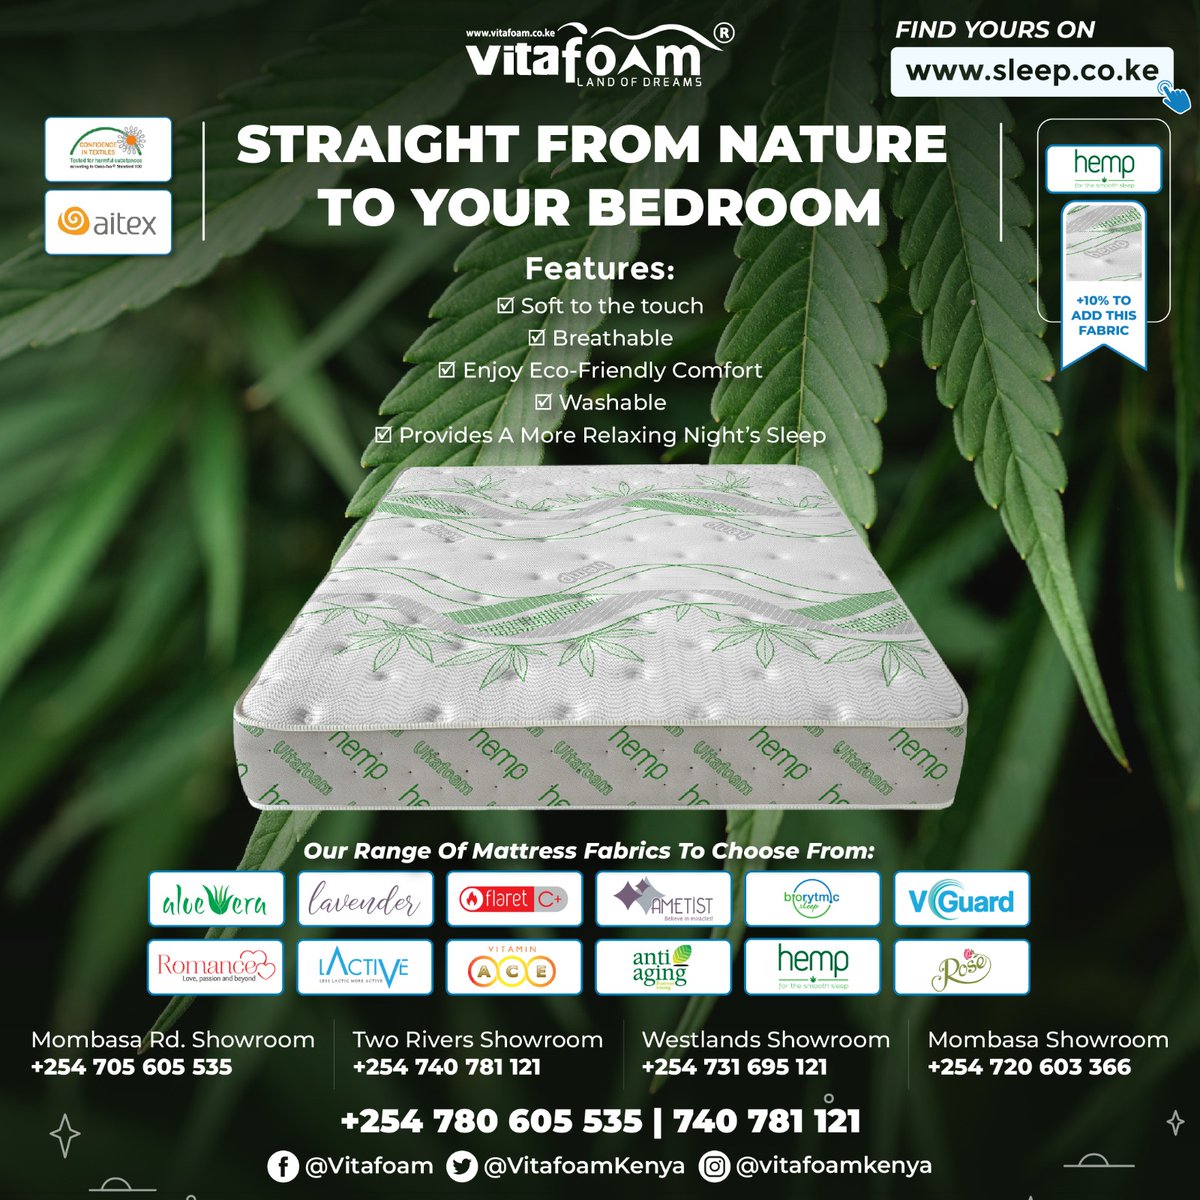 🌟🍃🙋‍♀️😌💫#SleepBetter With Our Hemp Infused Sleep Fabrics Exclusively Available From #VitaFoamKenya® 💫😌🍃🙋‍♂️🌟 ☎ For All Your *Mattress, *Pillow, *Bed & *Sleep Accessory & Fabric Enquiries, Orders & Deliveries: 0740 781 121 | 780 605 535 📍 Locations: bit.ly/30VqOrf